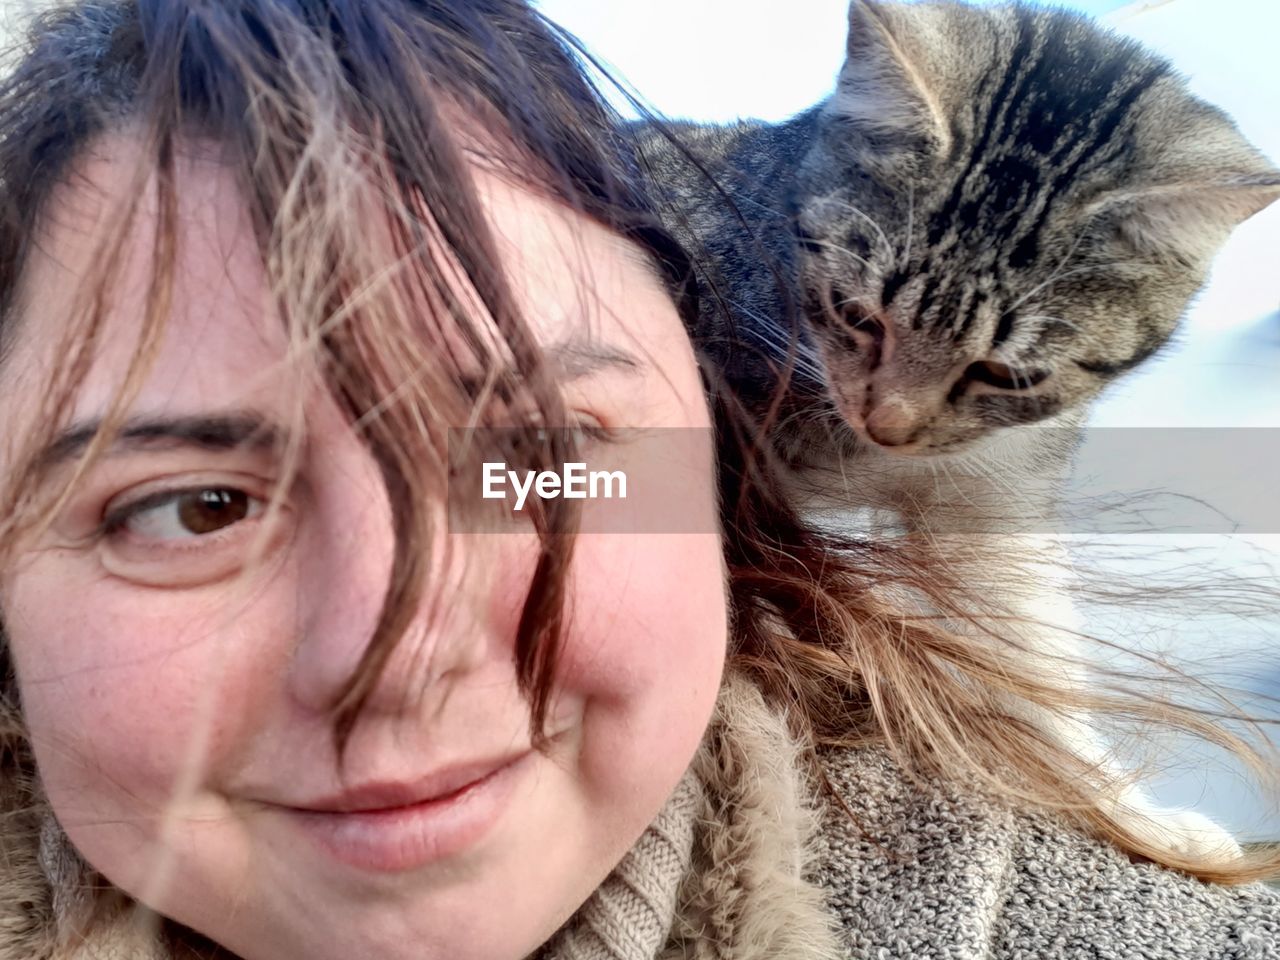 CLOSE-UP PORTRAIT OF CAT WITH WOMAN